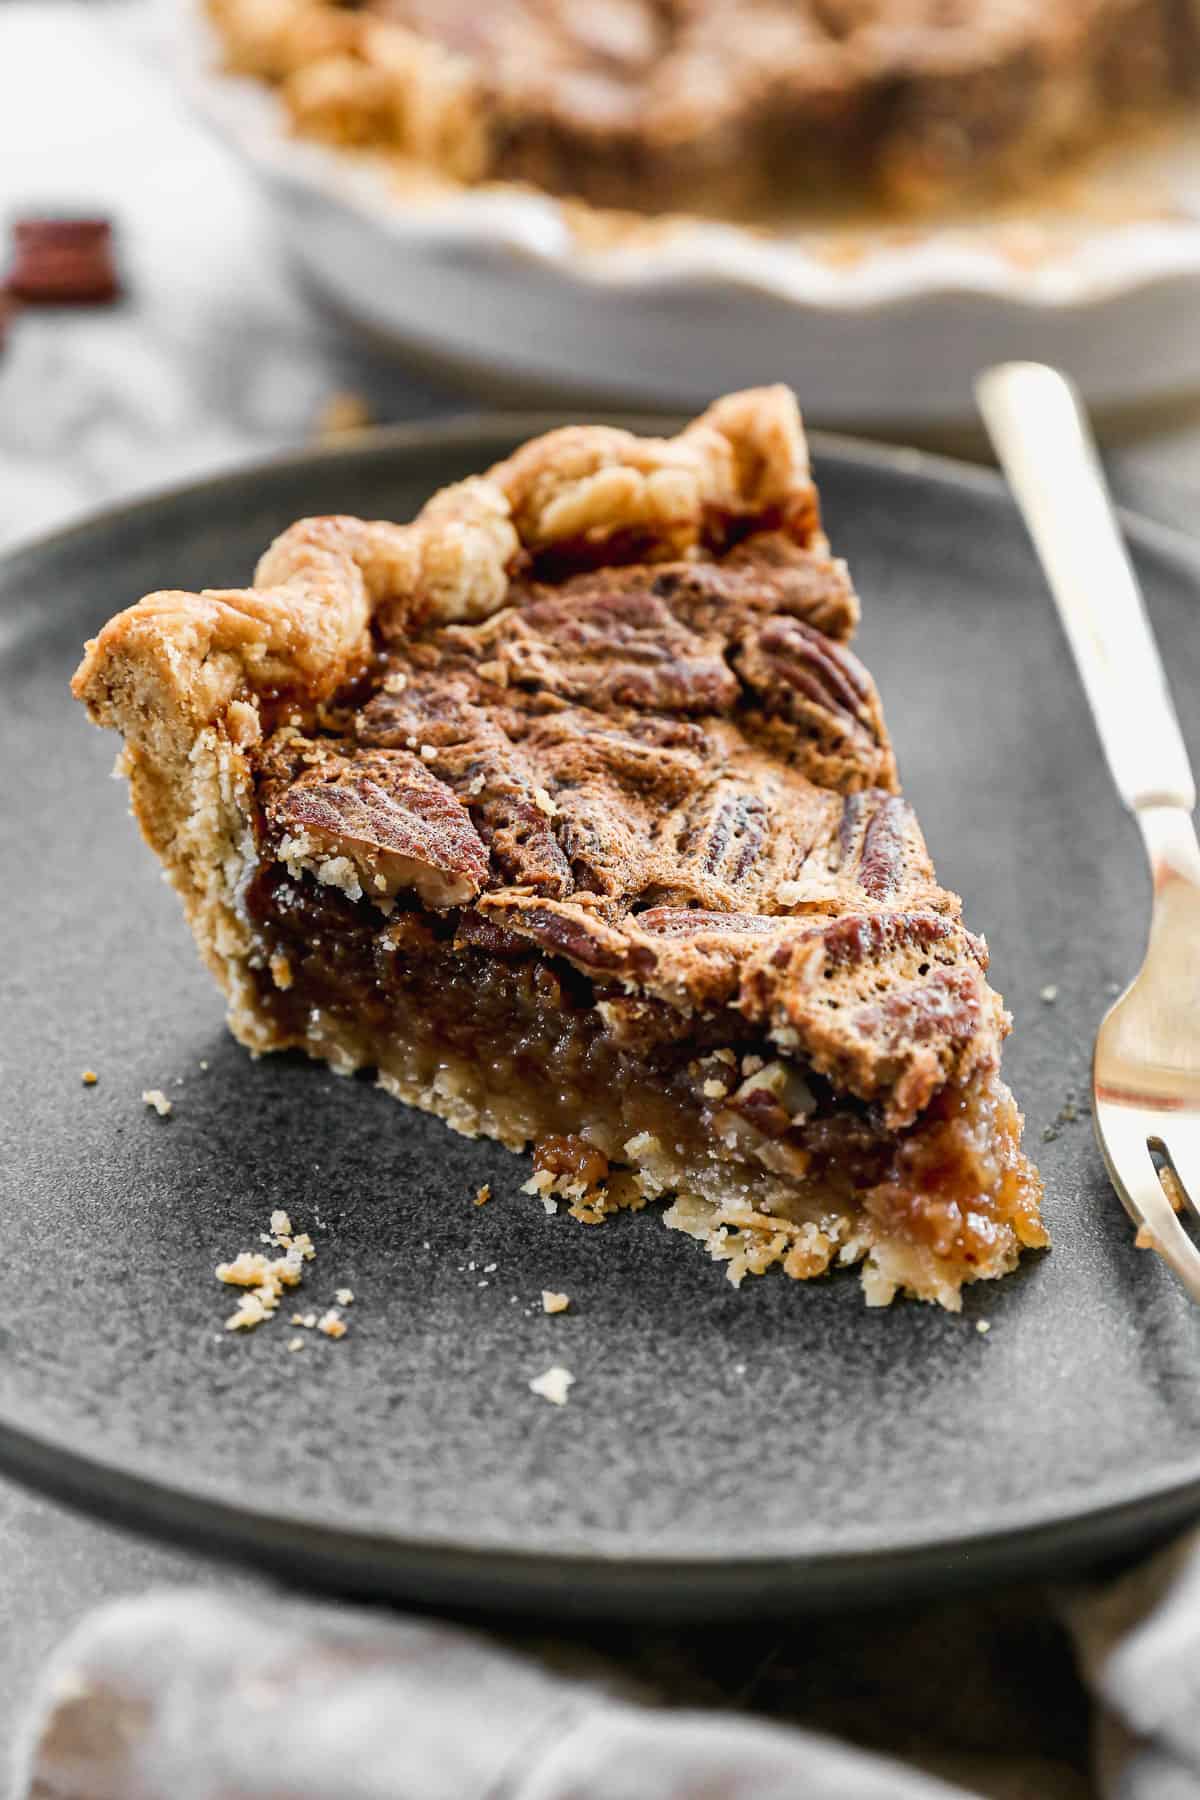 A slice of Pecan Pie on a plate with a fork, ready to enjoy!